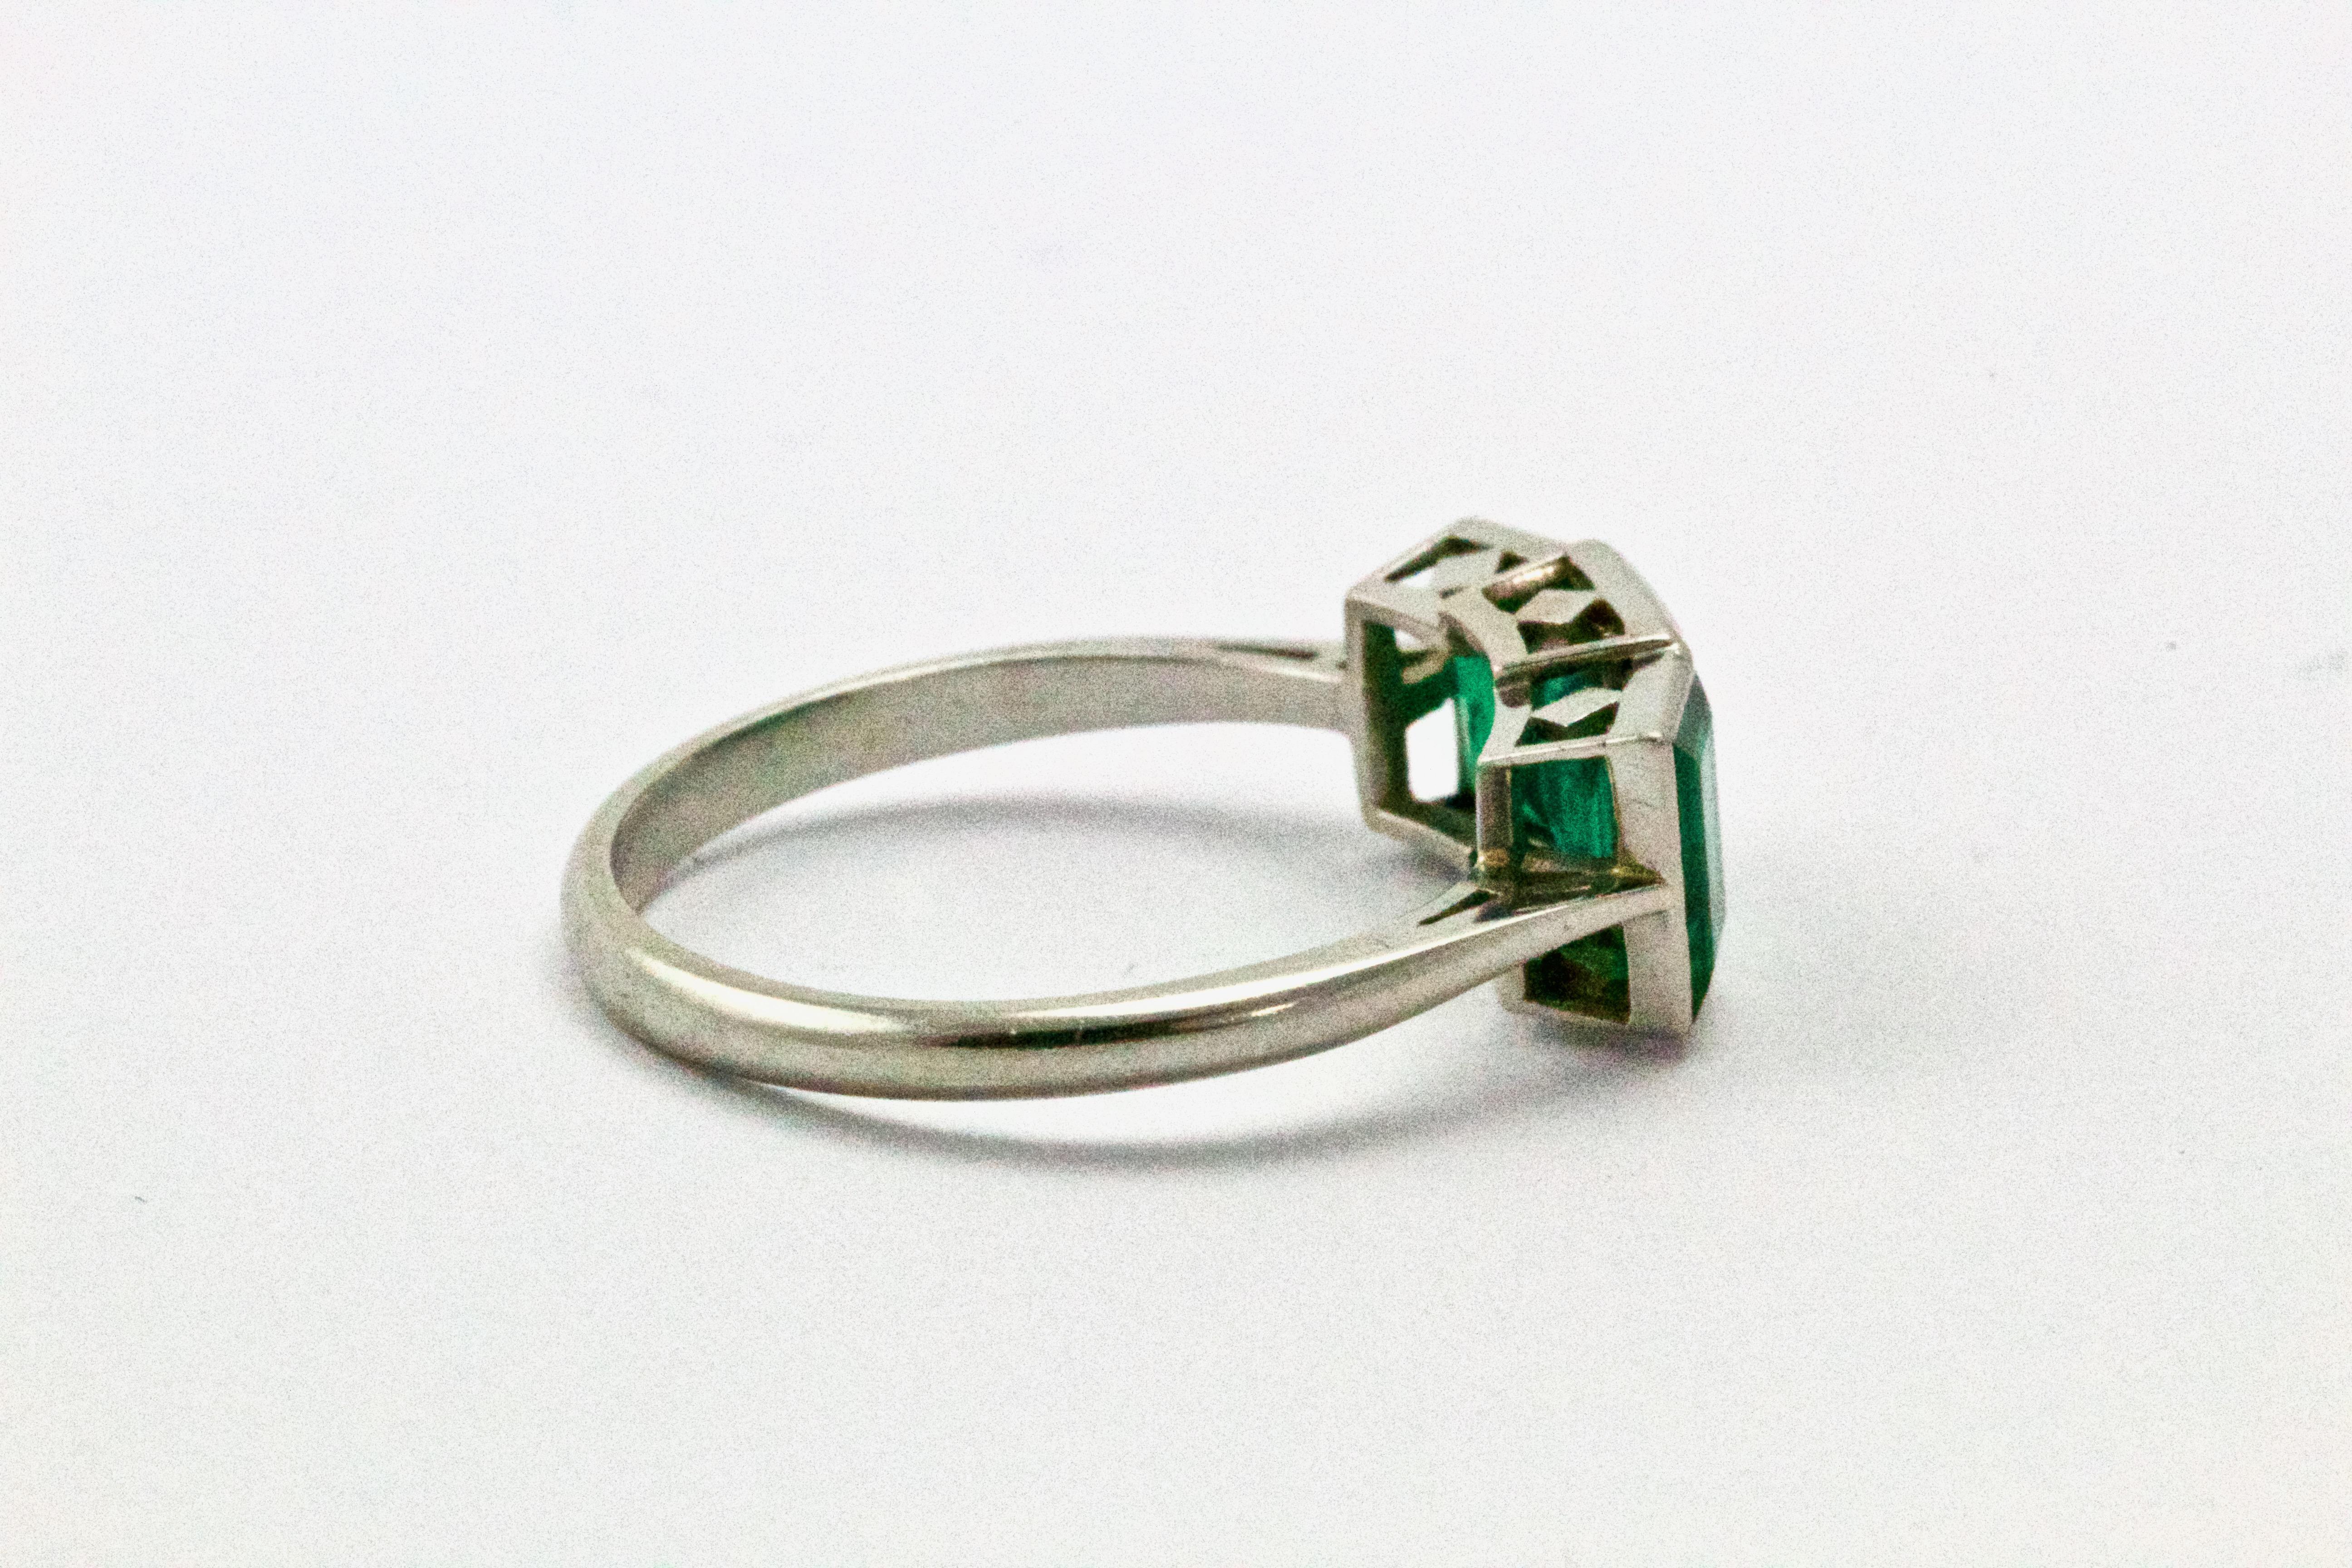 A mesmerising Art Deco era Emerald trinity ring. Each stone, step cut and channel set - displays an excellent deep green colour. Approx 1.5 carats total. An incredibly stylish 1920s take on the classic three-stone, modelled in platinum